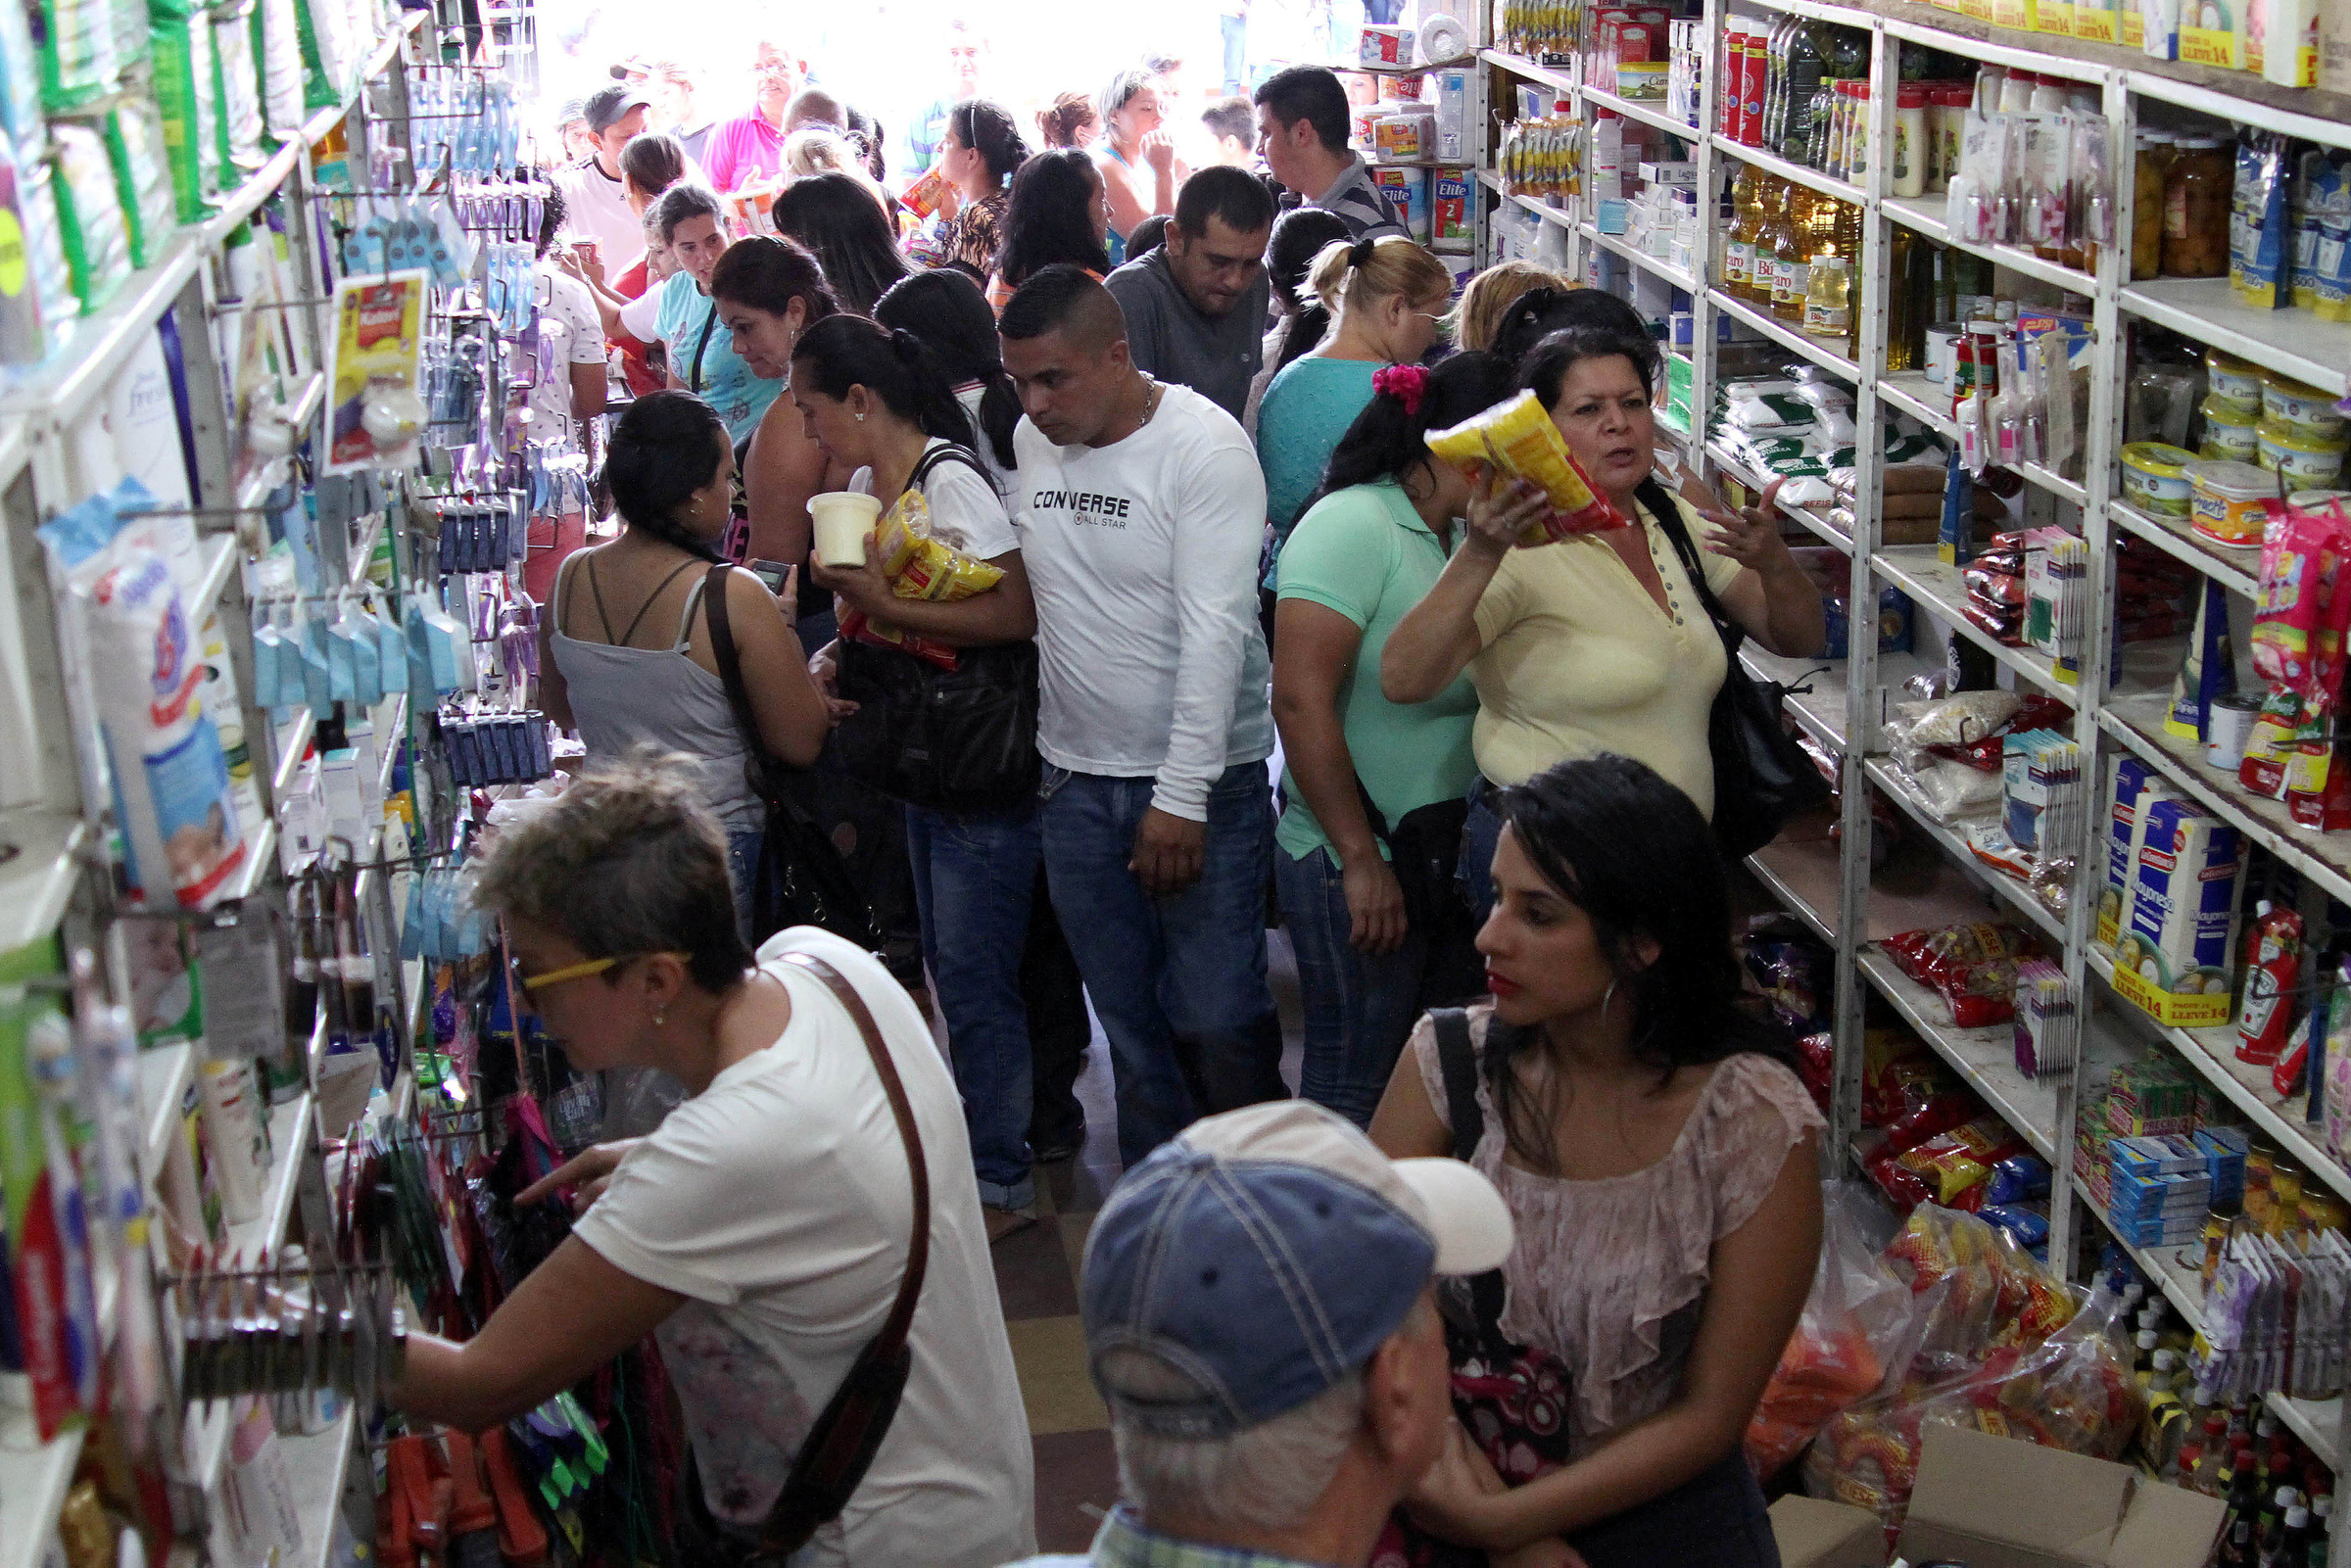 Venezuelans buy goods at a local supermarket in Cucuta, Colombia, July 10, 2016, during a temporary border opening. (CNS photo/Manuel Hernandez, Reuters) 